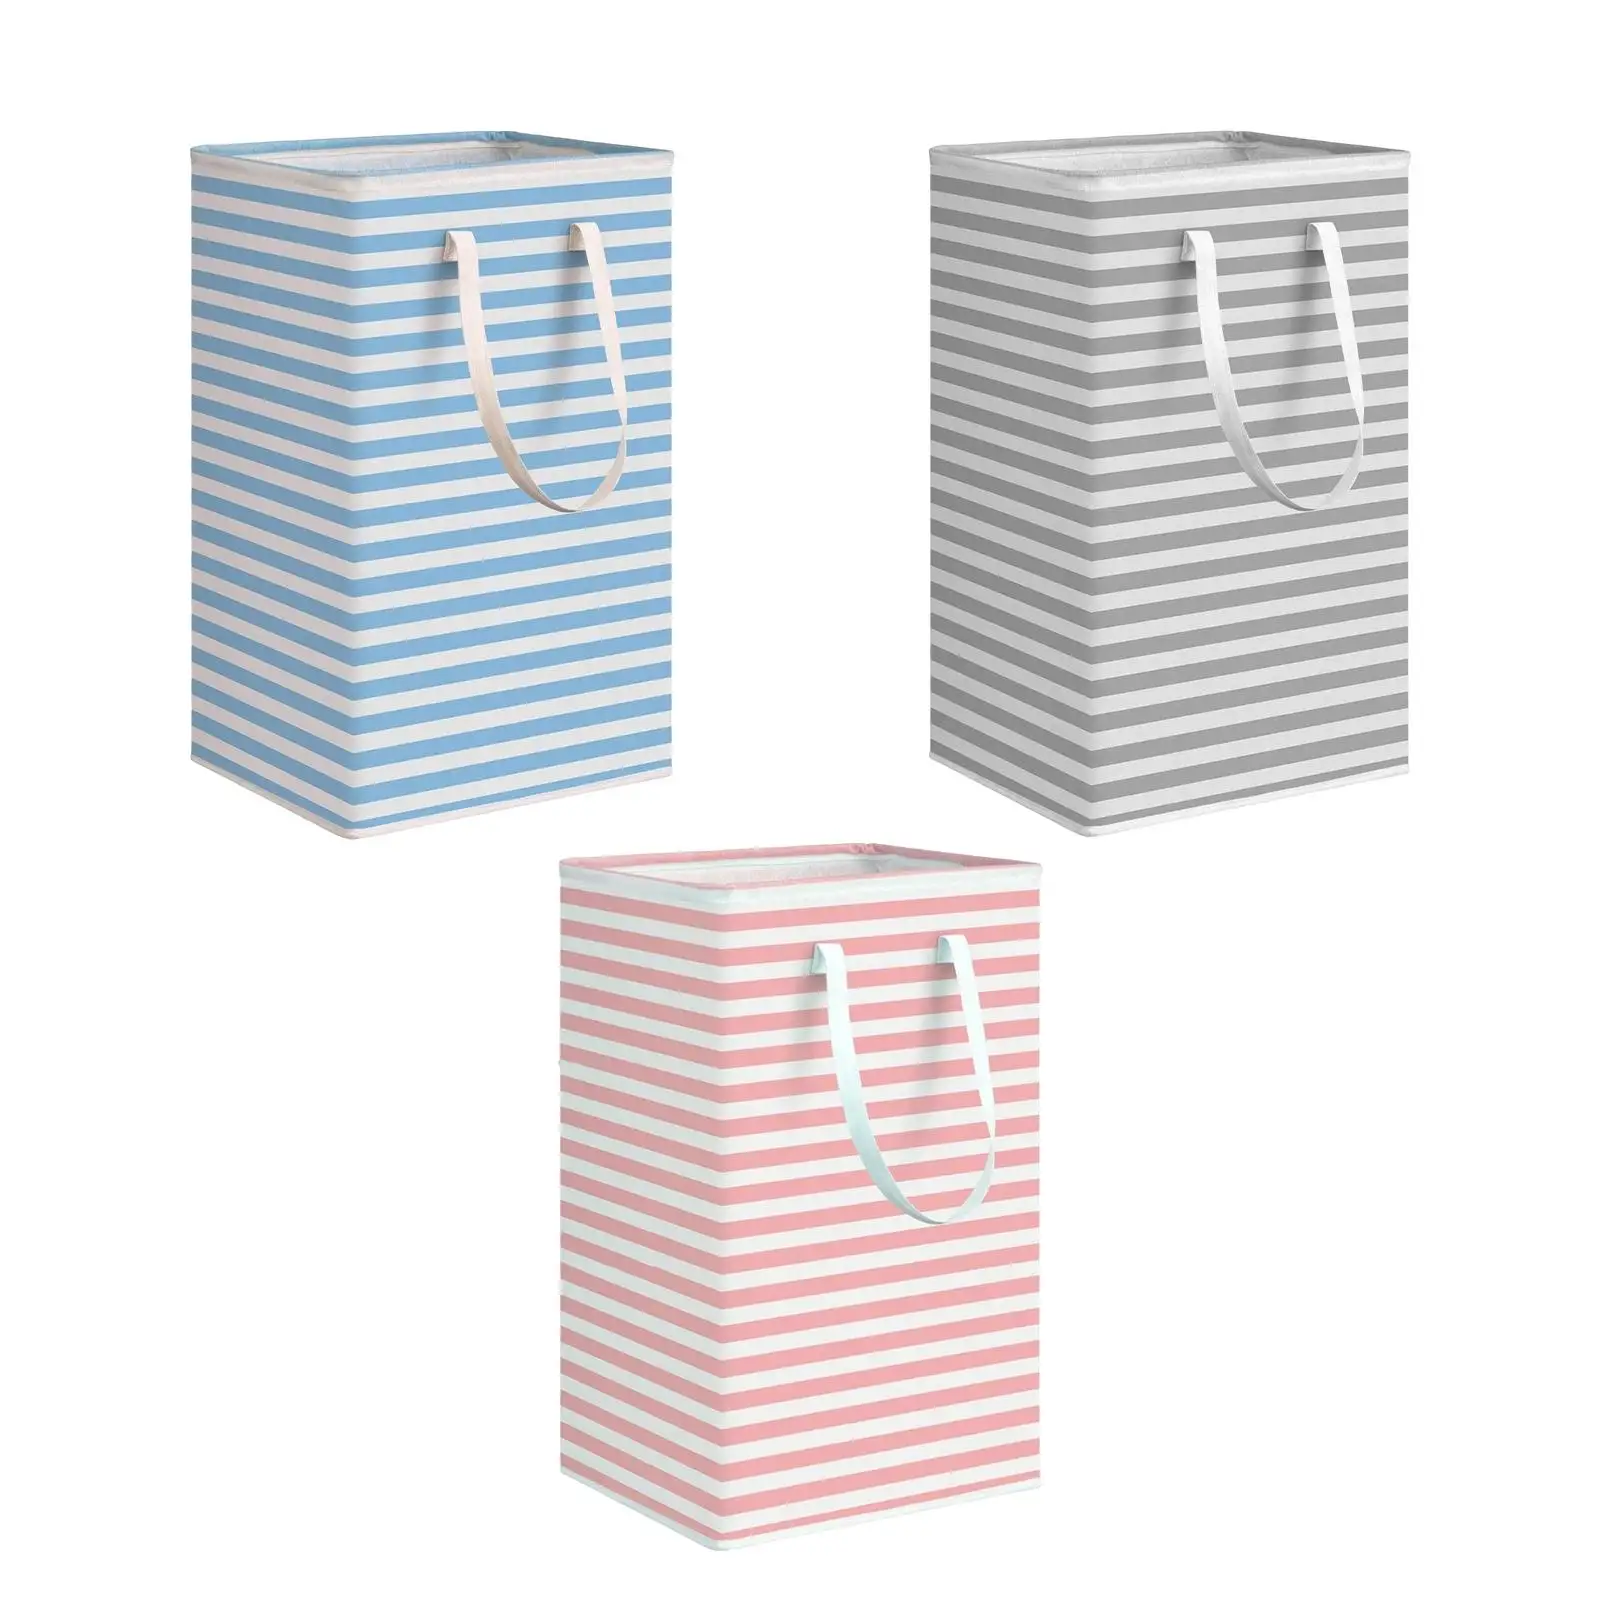 Laundry Hamper Toys Clothes Organizer with Handles Washing Bin Clothes Hamper Storage Basket for Apartments Hotel Dorm Bedroom